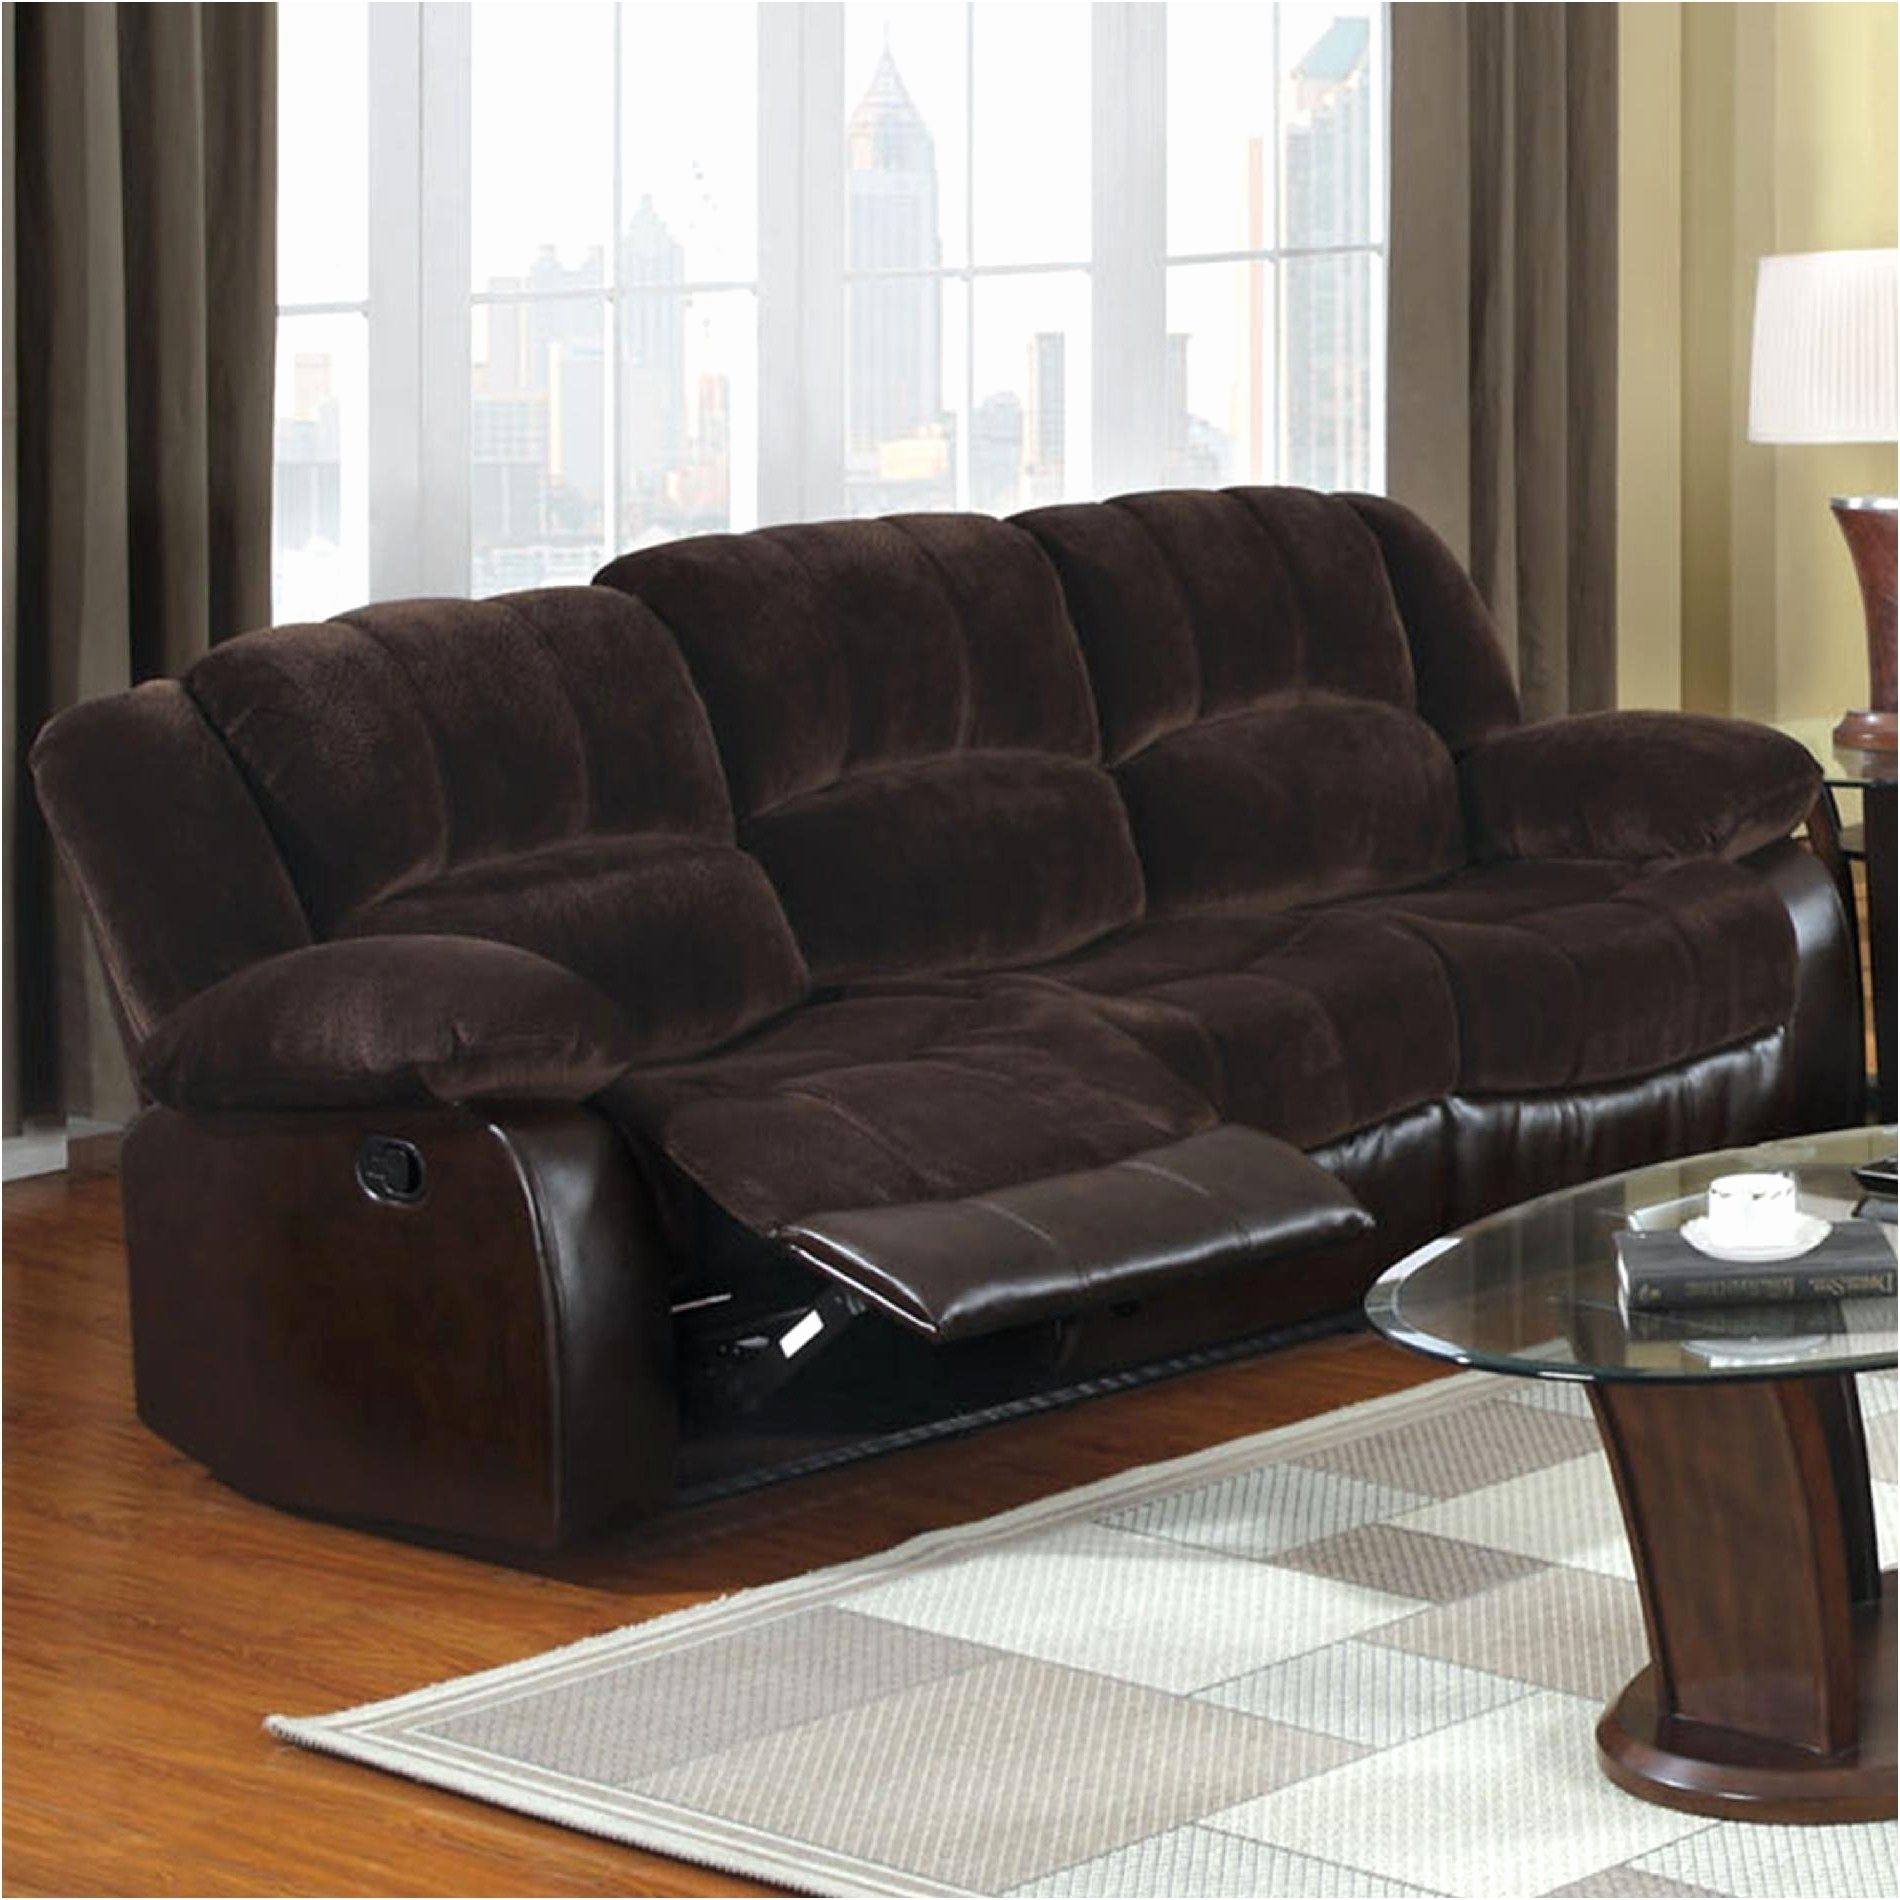 Fresh Sears Leather Sofa New – Intuisiblog For Sears Sofas (Photo 2 of 10)